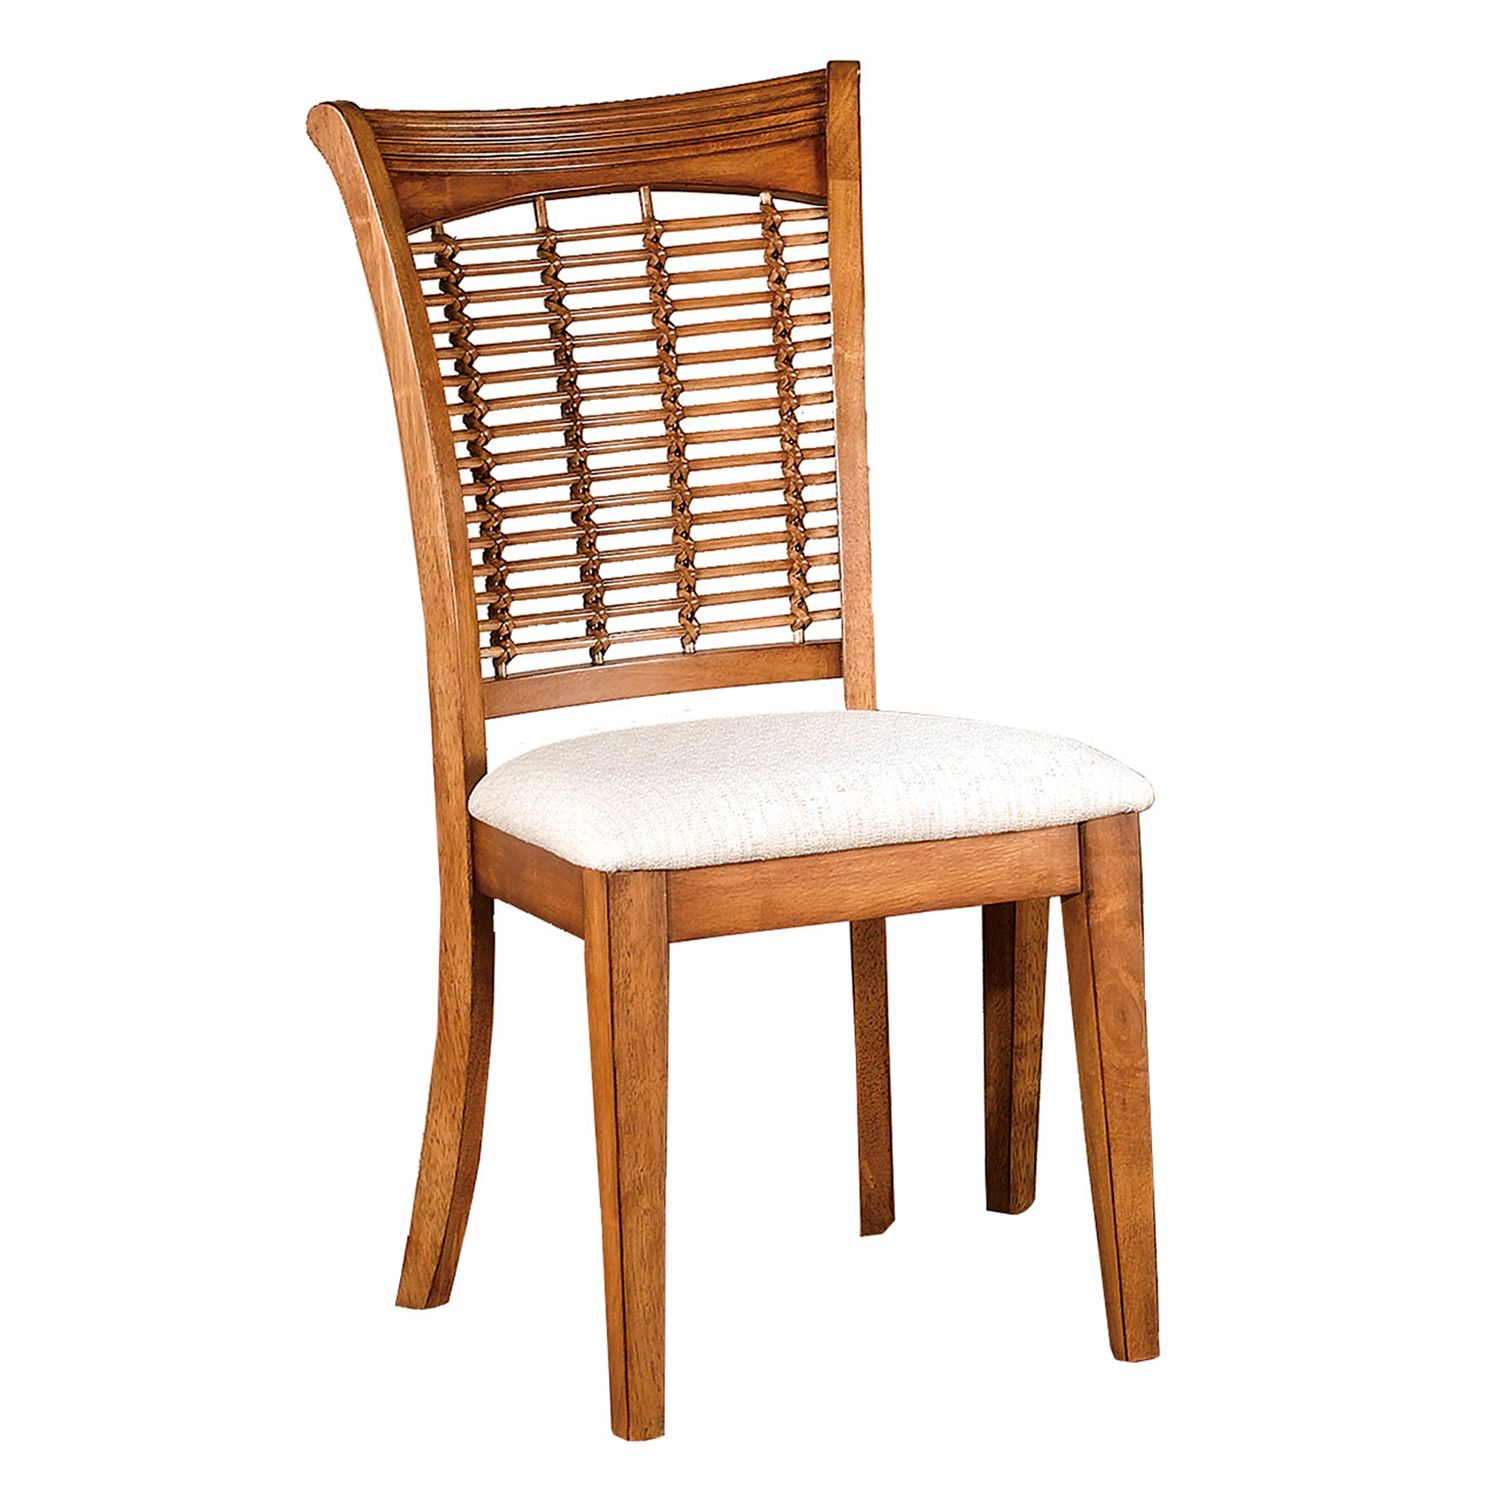 Image for Hillsdale Furniture Bayberry Classic Dining Chair 2-piece Set at Kohl's.